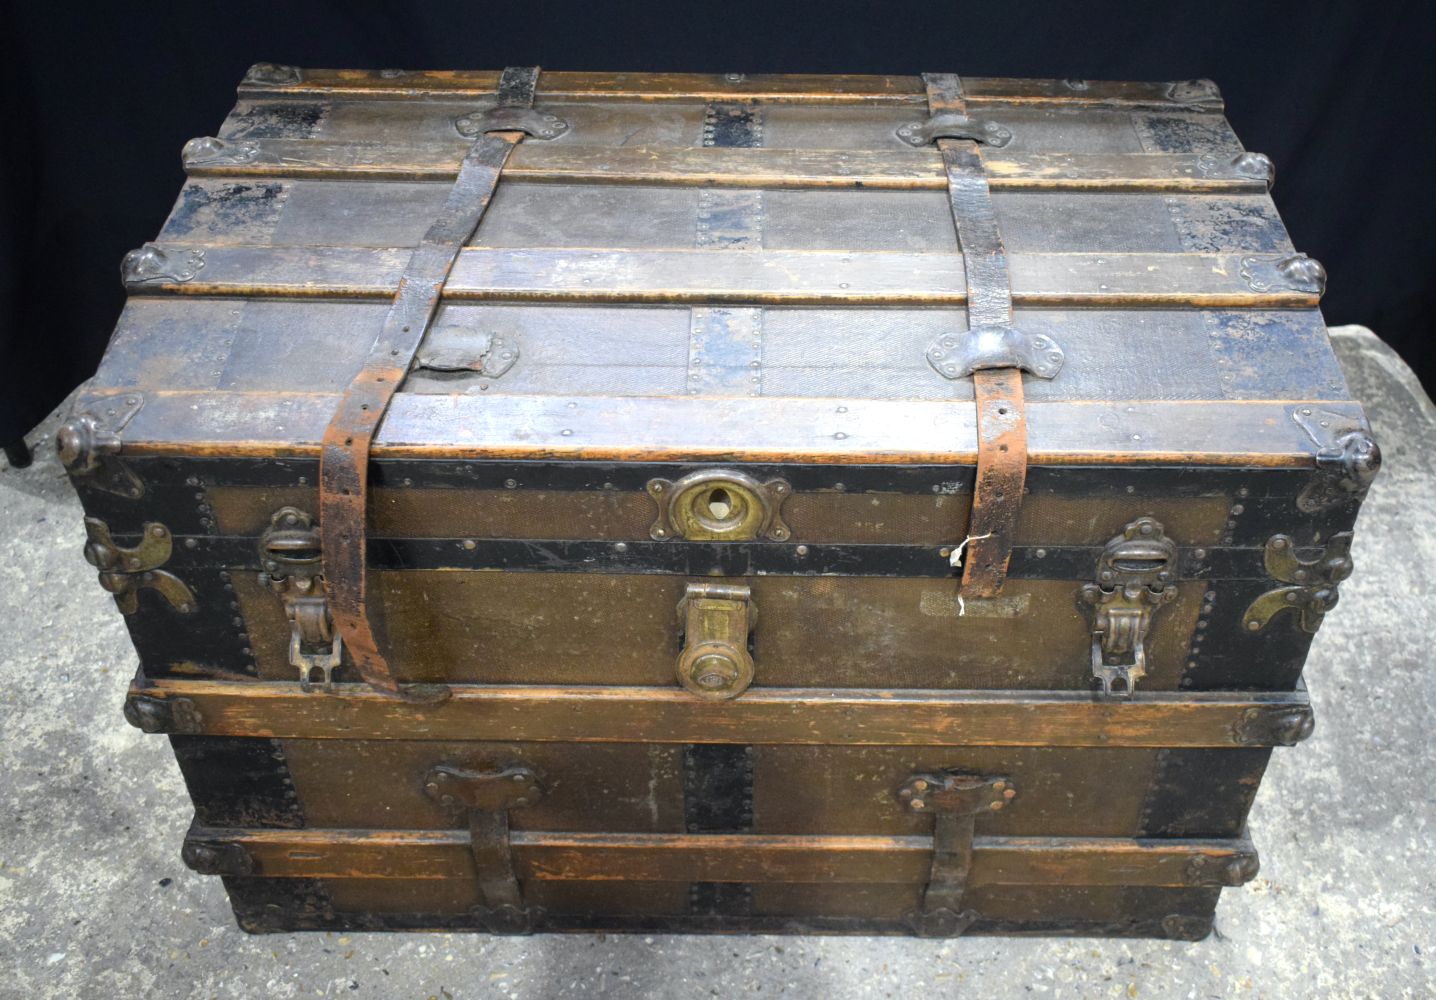 A 19th Century leather coated wooden trunk with wooden banding 65 x 88 x 53 cm. - Image 2 of 5